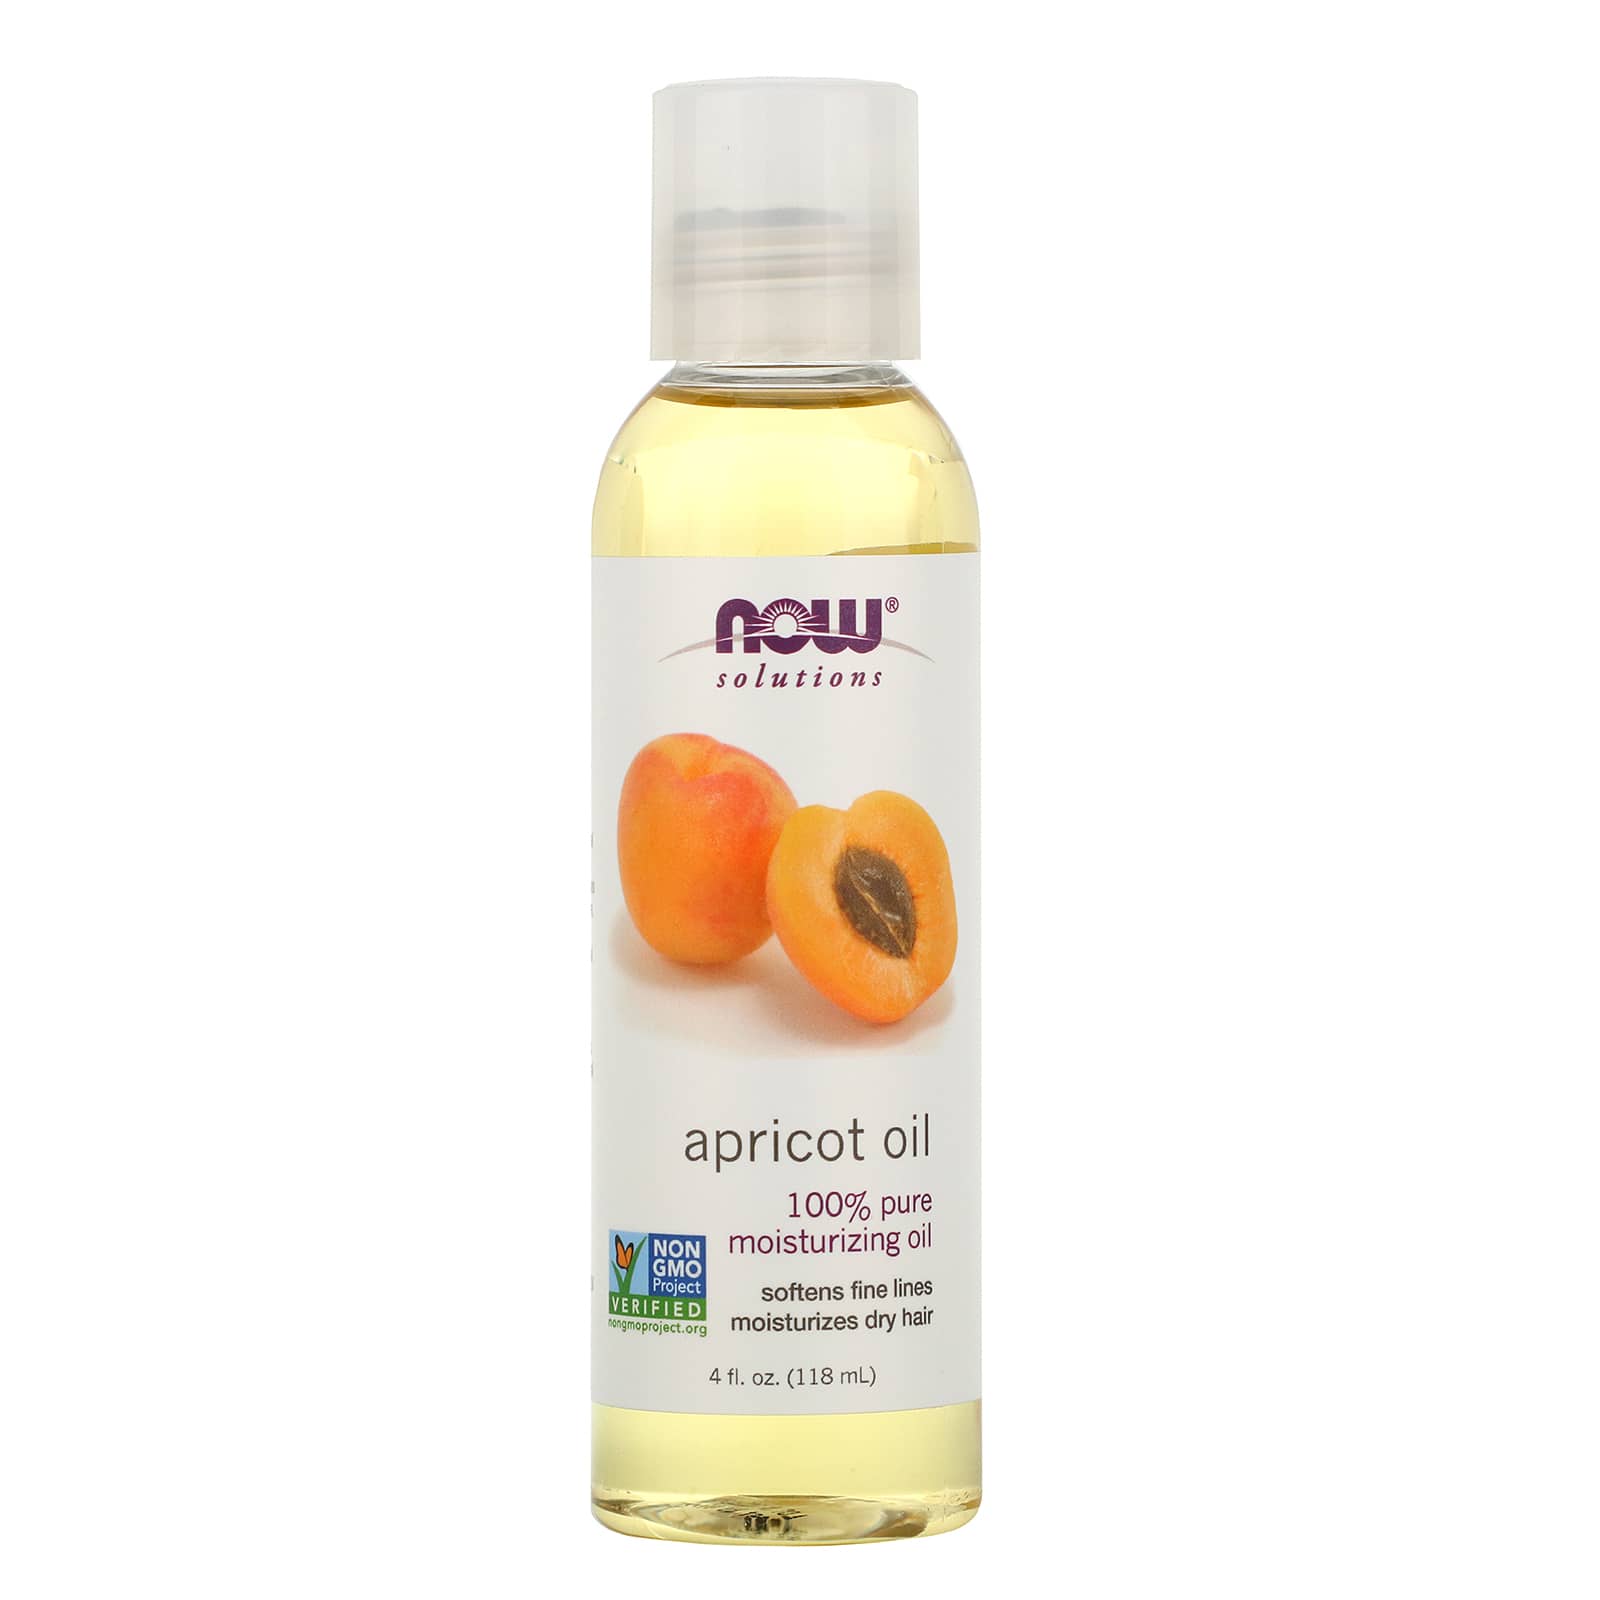 Solutions - Apricot Oil - 4 fl oz (118 ml) - NOW Foods